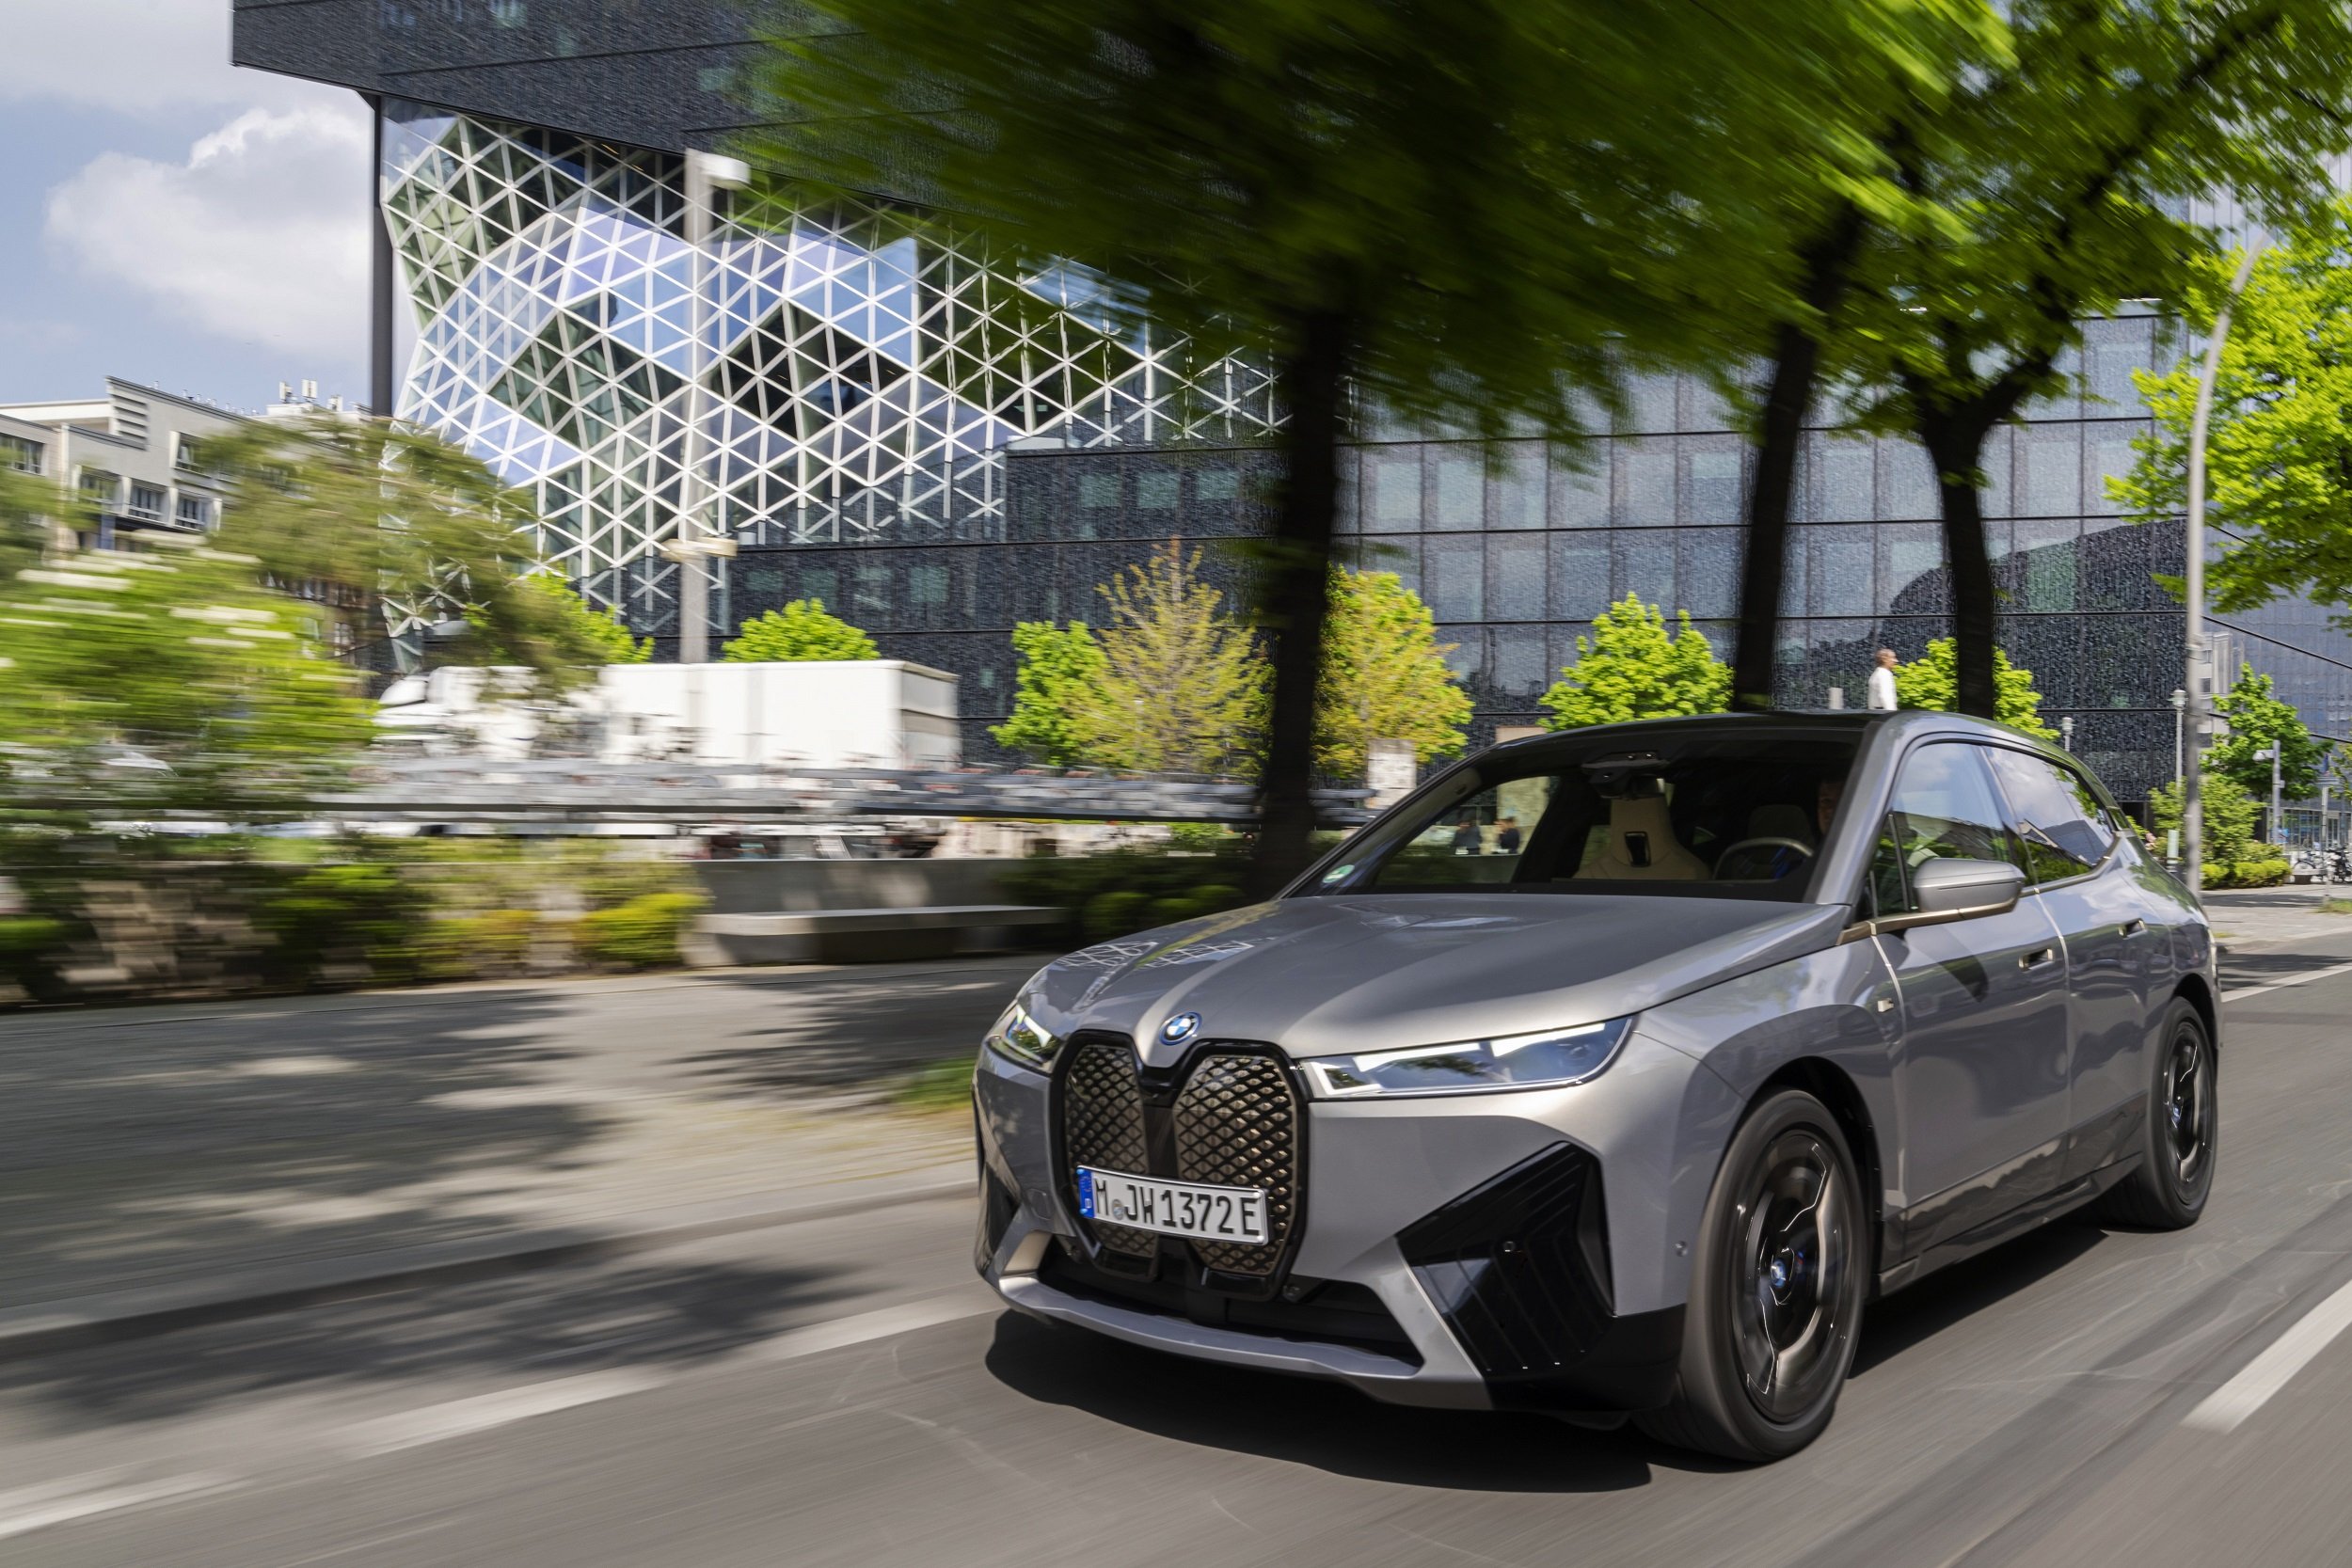 High Pace: Electric vehicle sales BMW brand more than double again in Q1